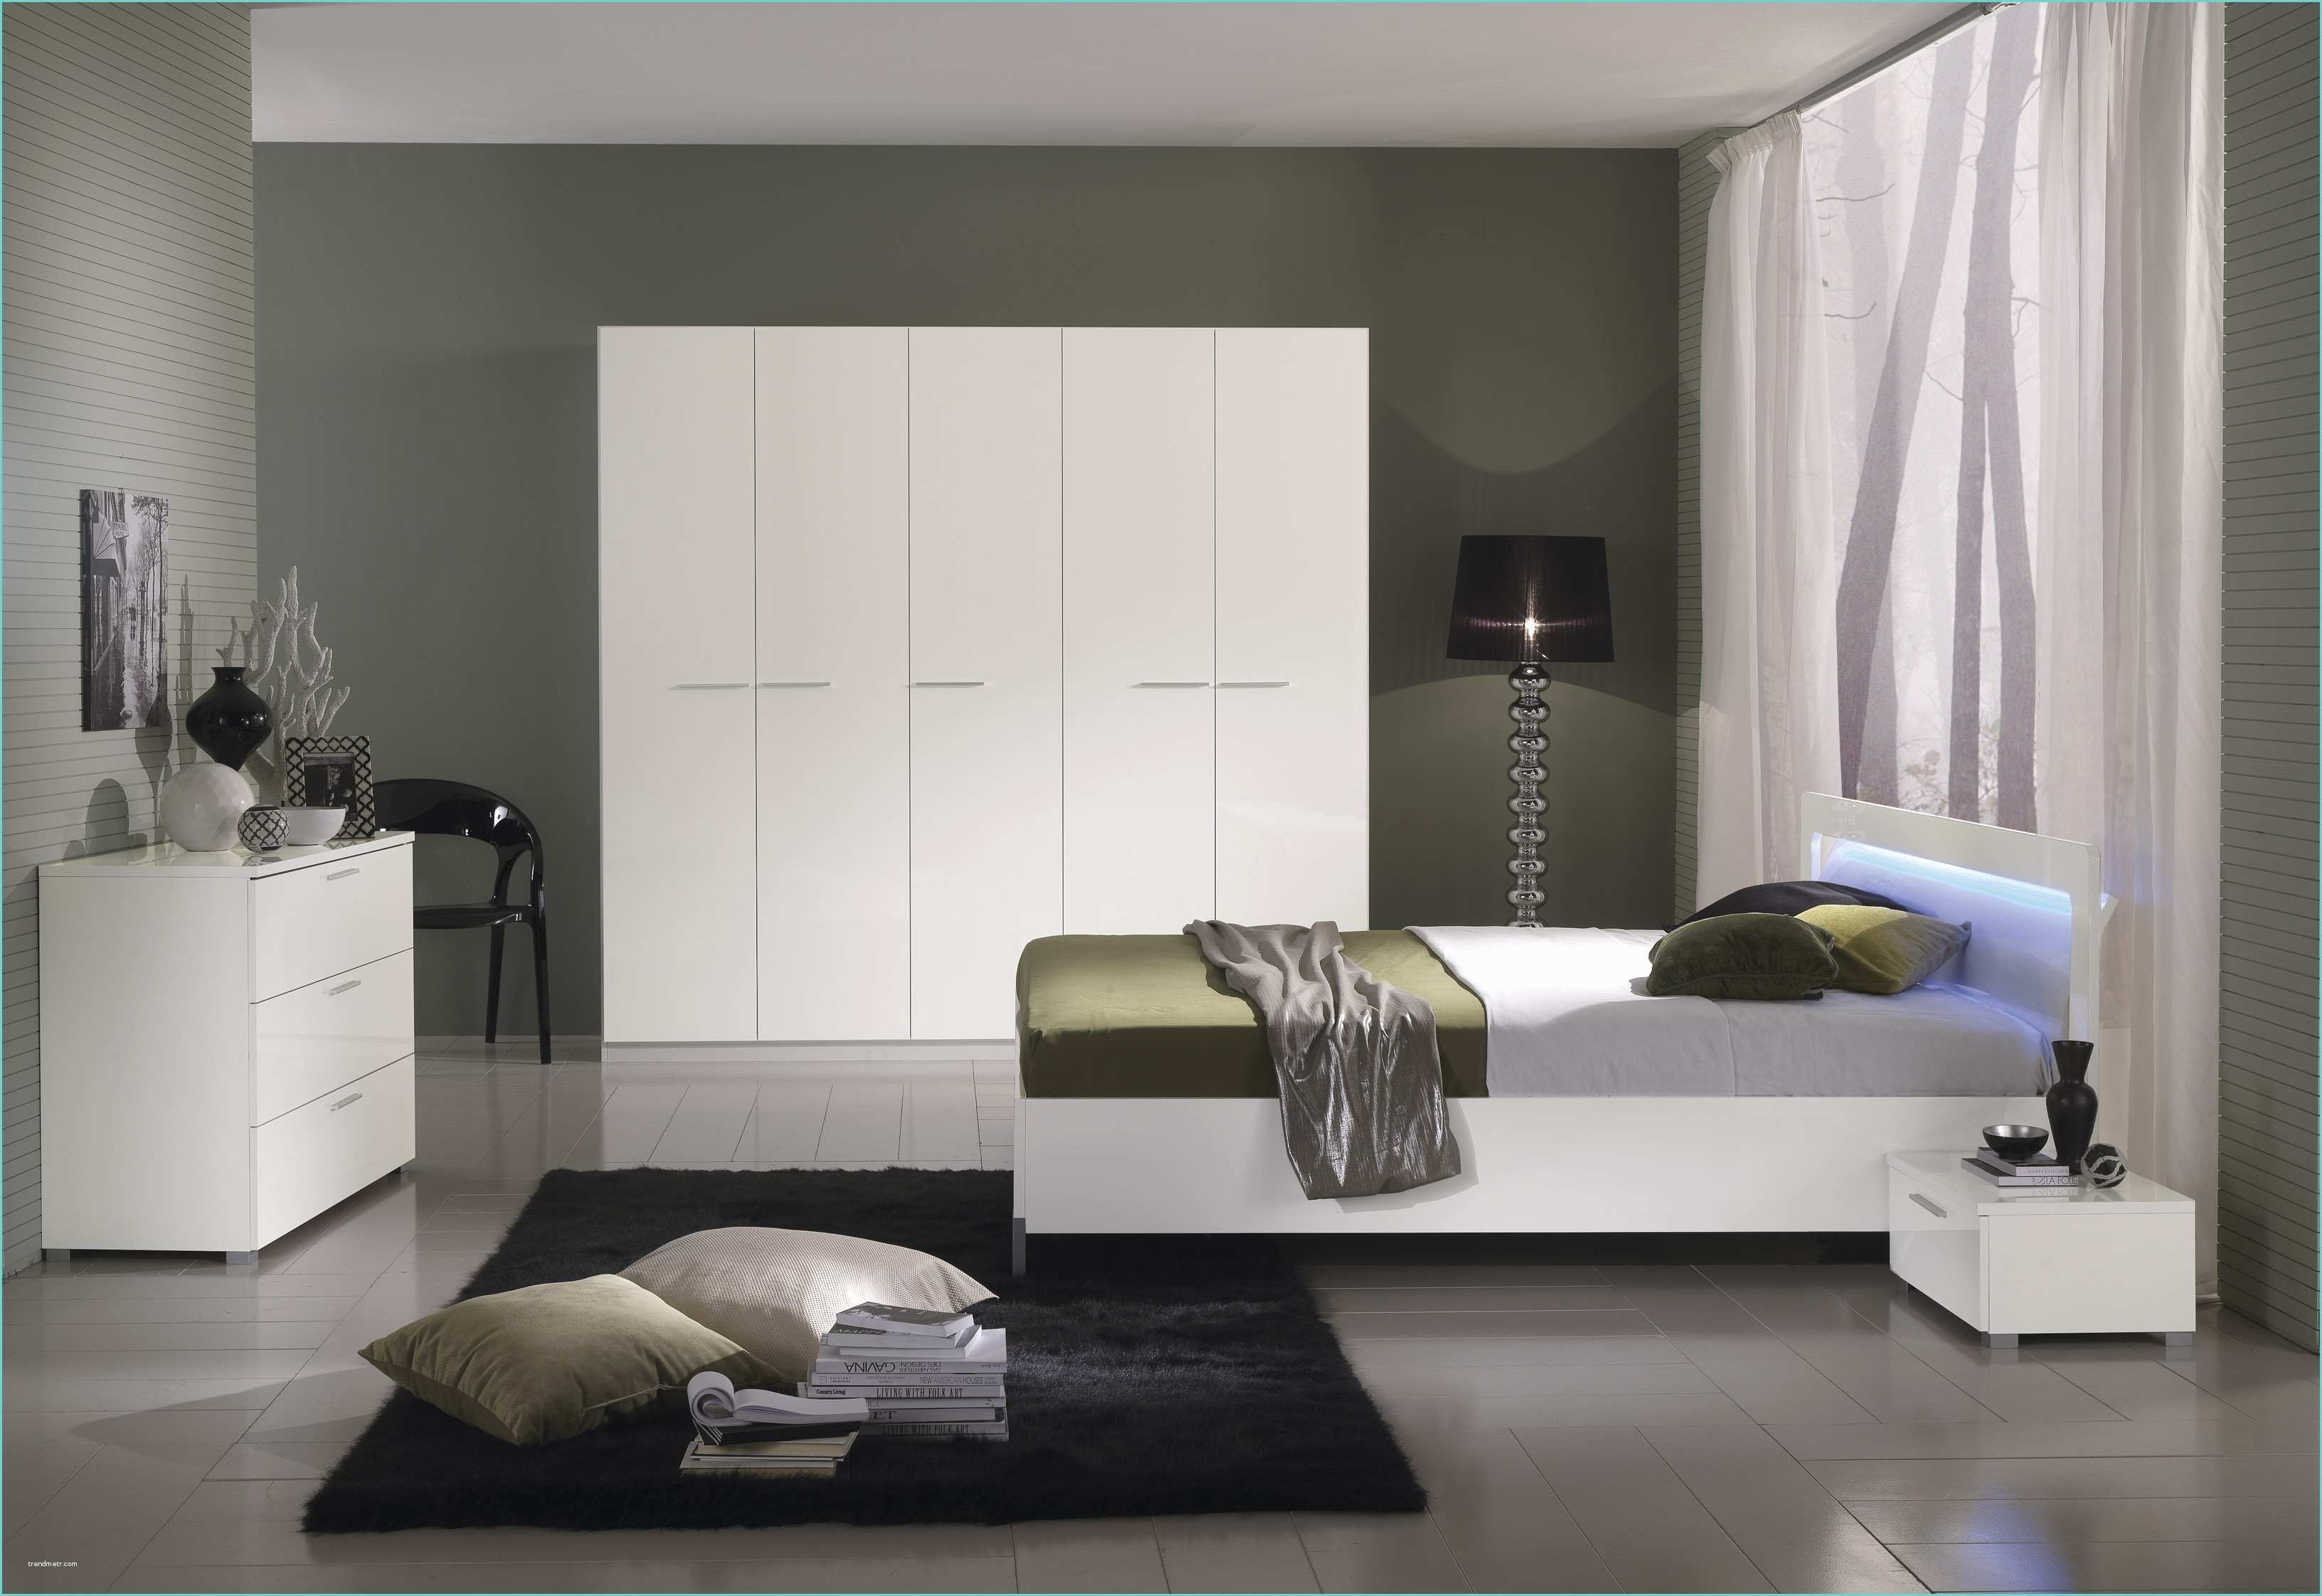 Chambre A Coucher Adulte Moderne Meuble Moderne Chambre A Coucher